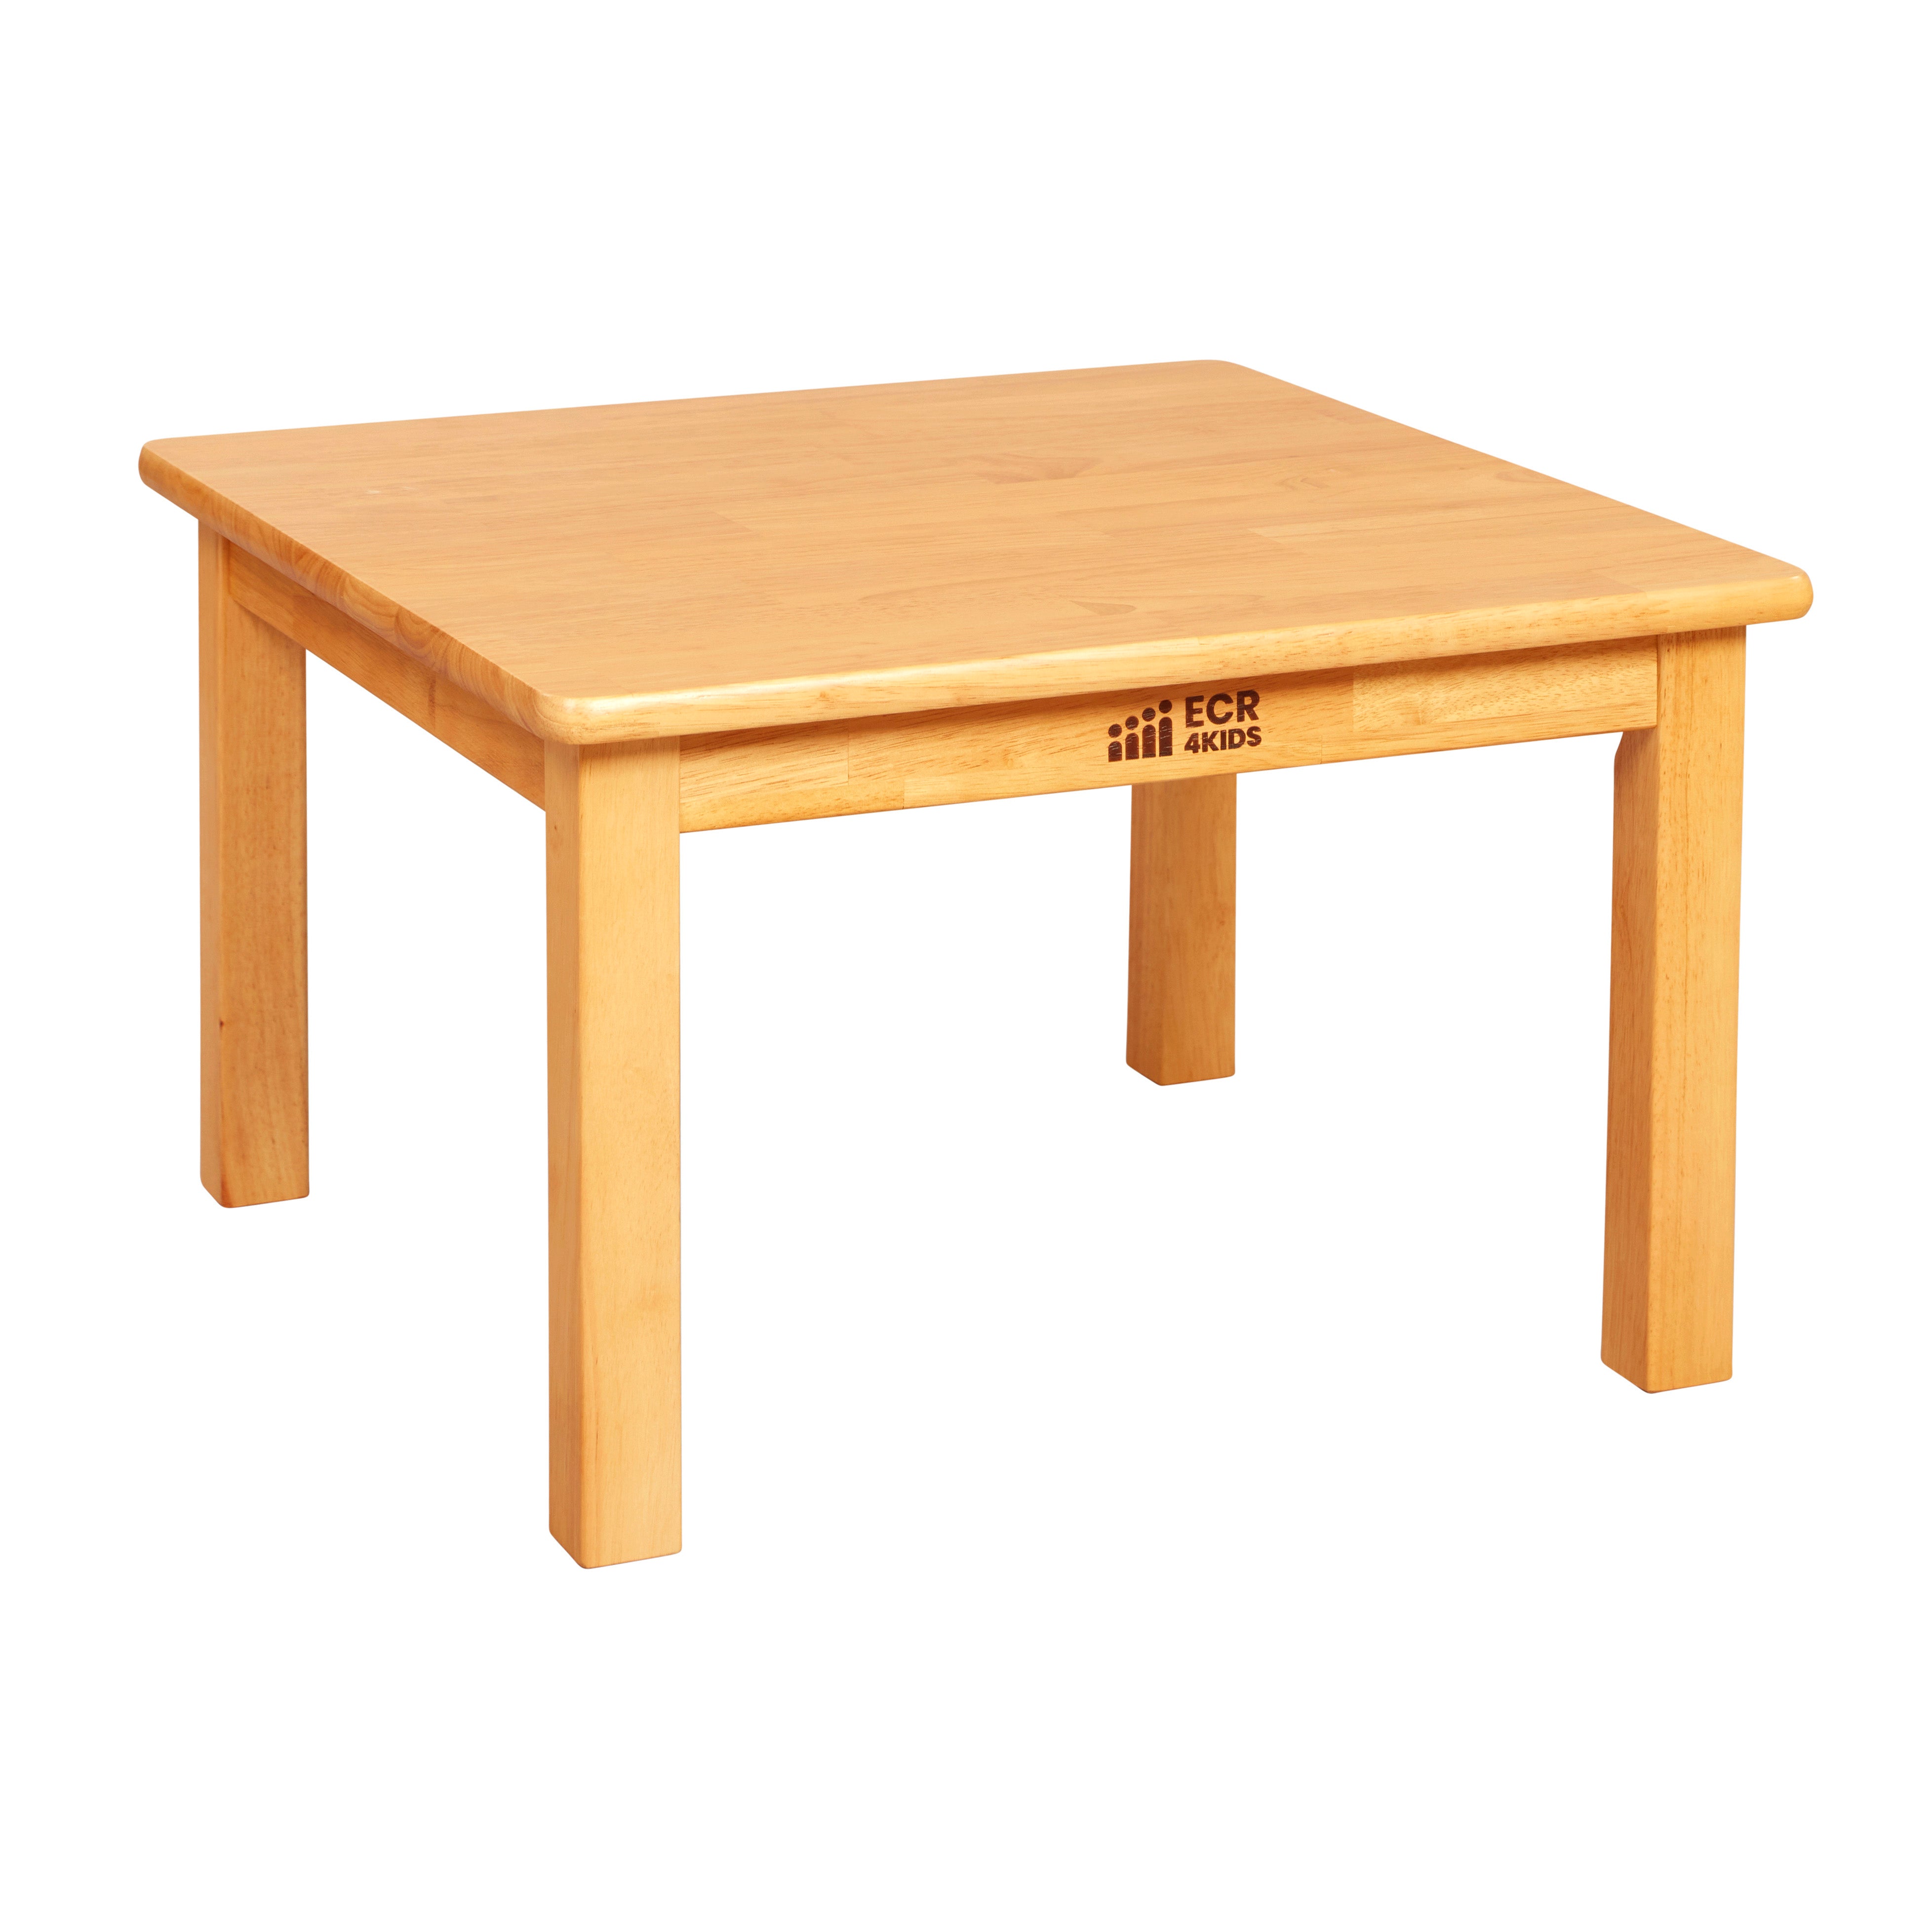 Hardwood Table with 14in Legs, Kids Furniture